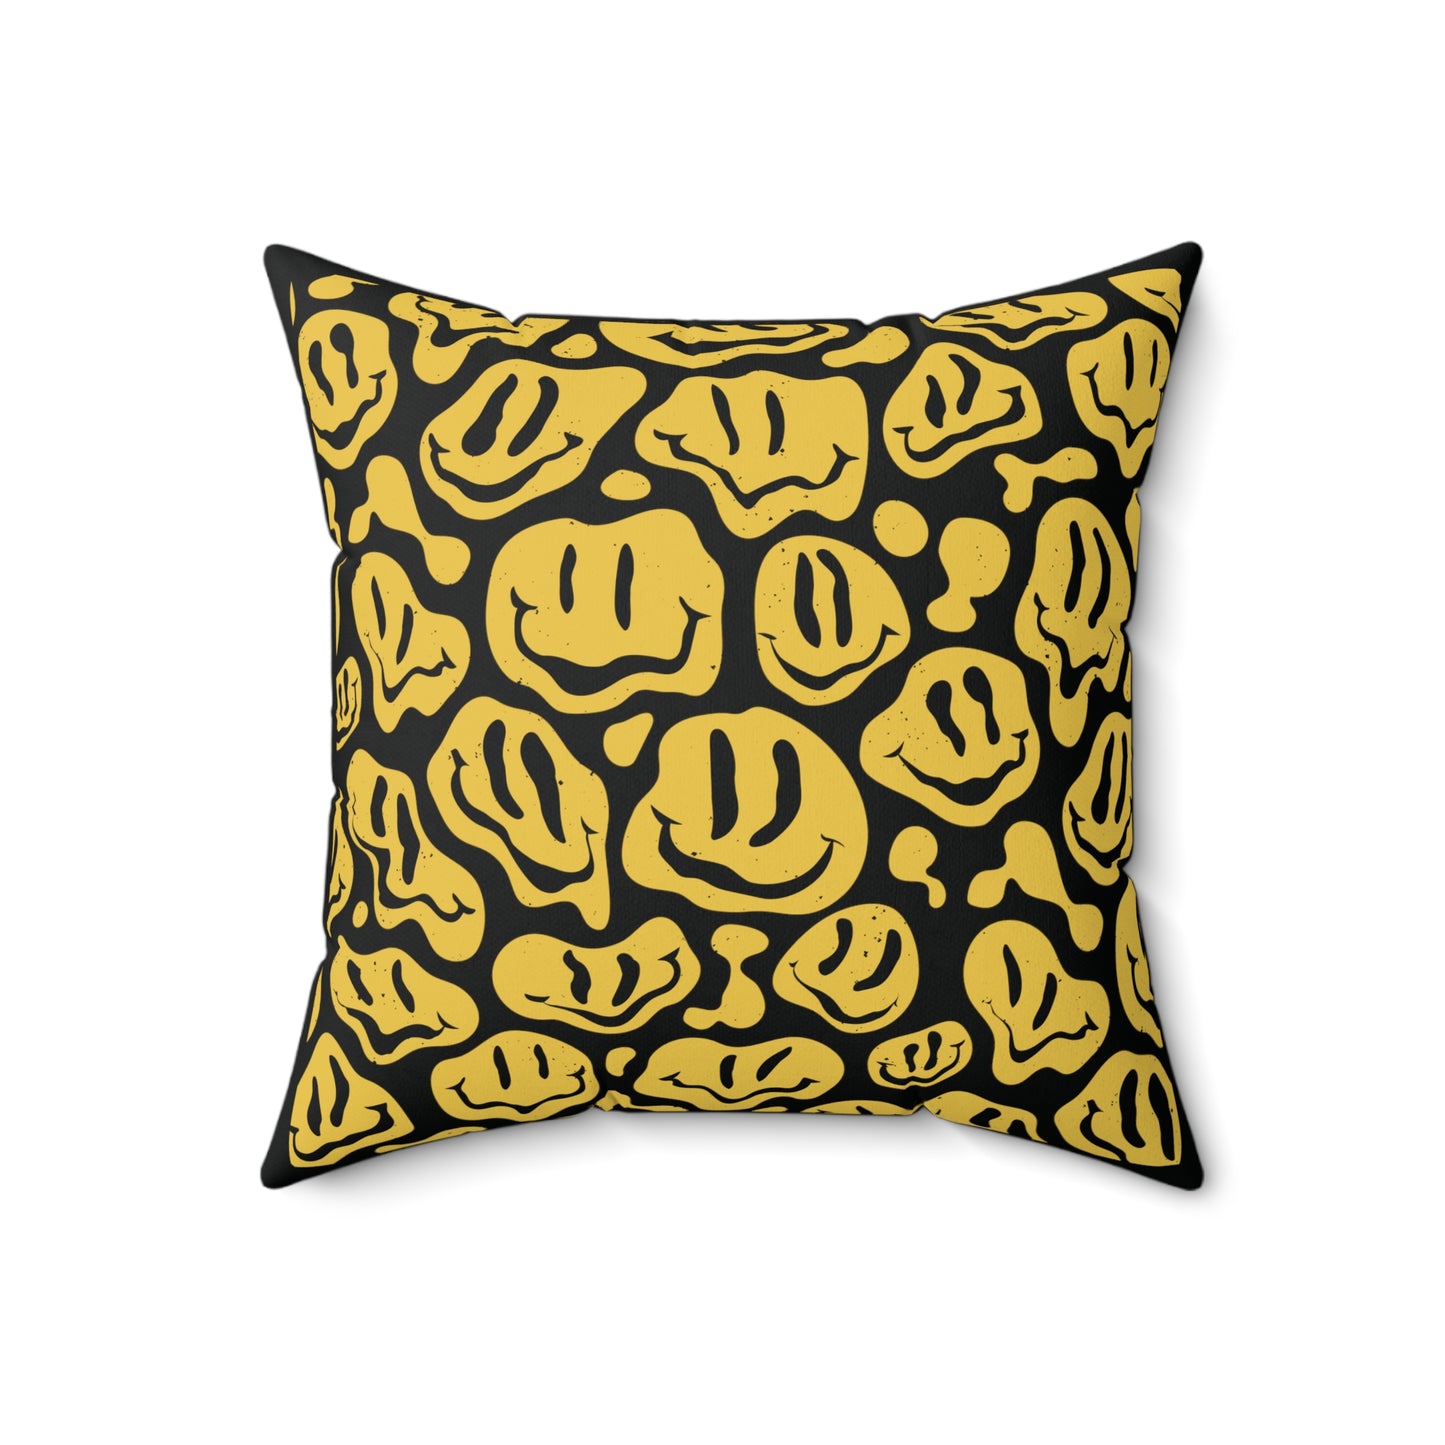 Melting Smiley Faces Square Pillow